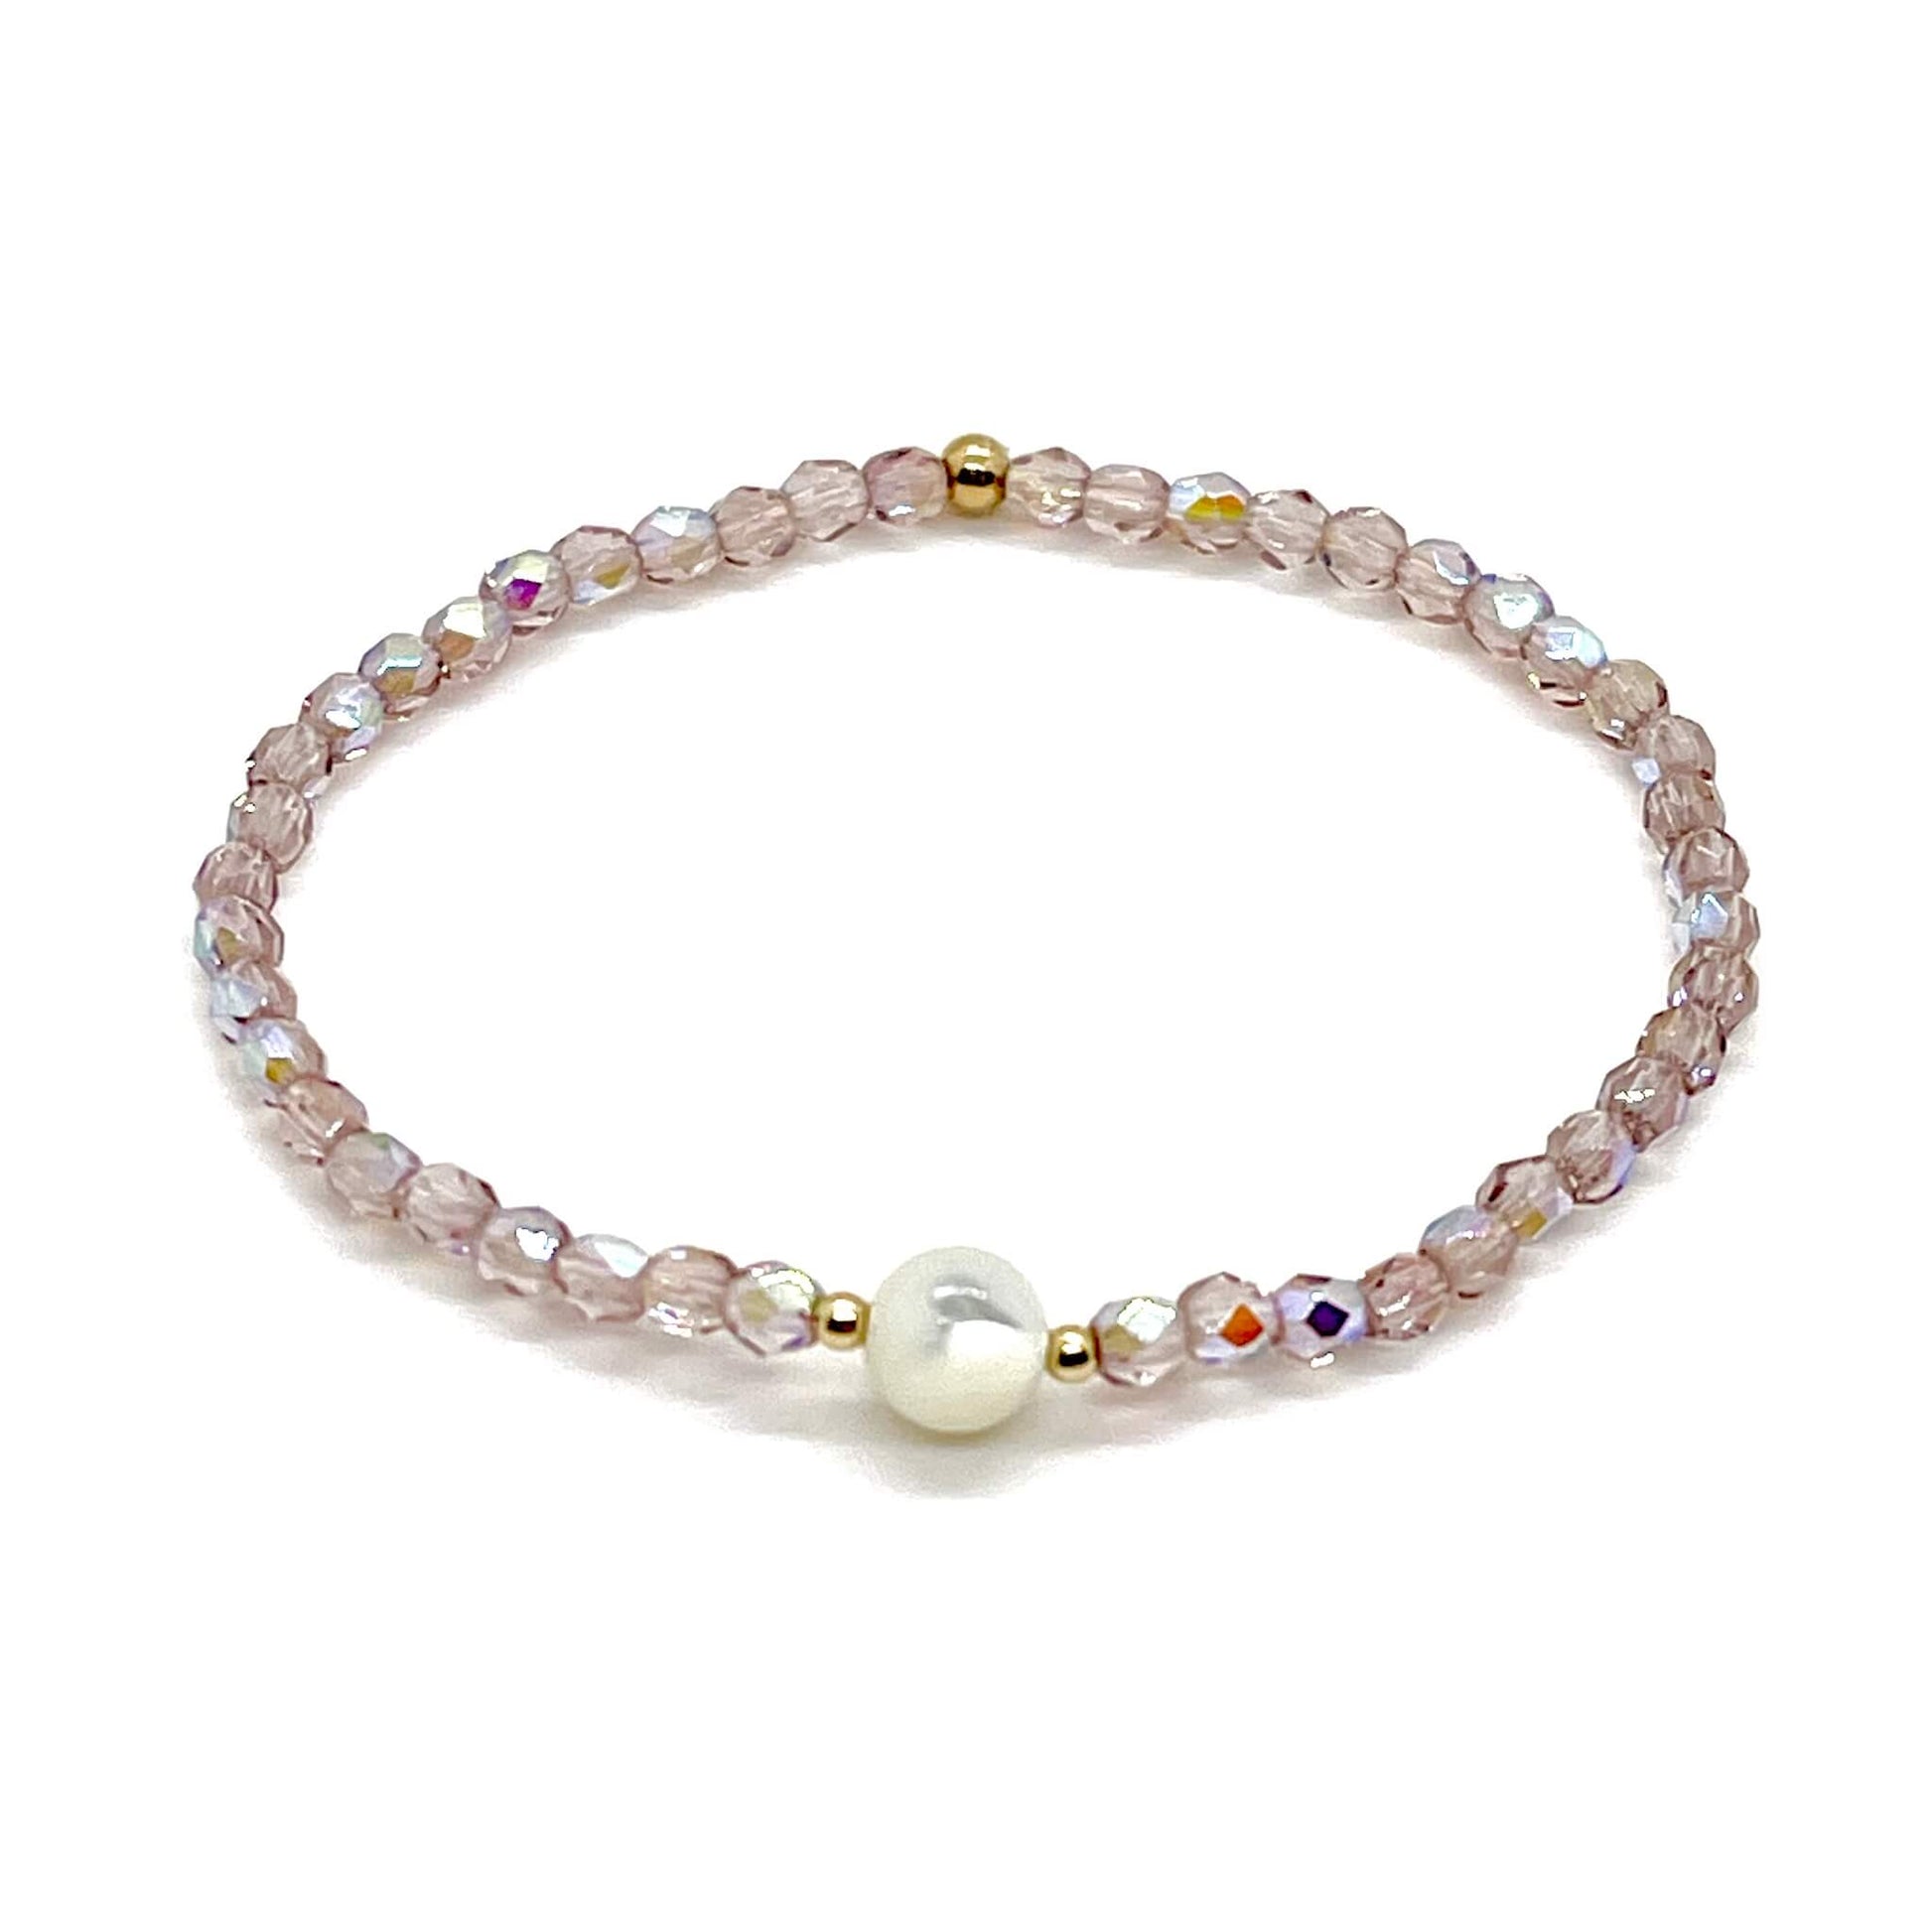 Light purple crystal bracelet with a mother-of-pearl center bead and small gold accent beads.